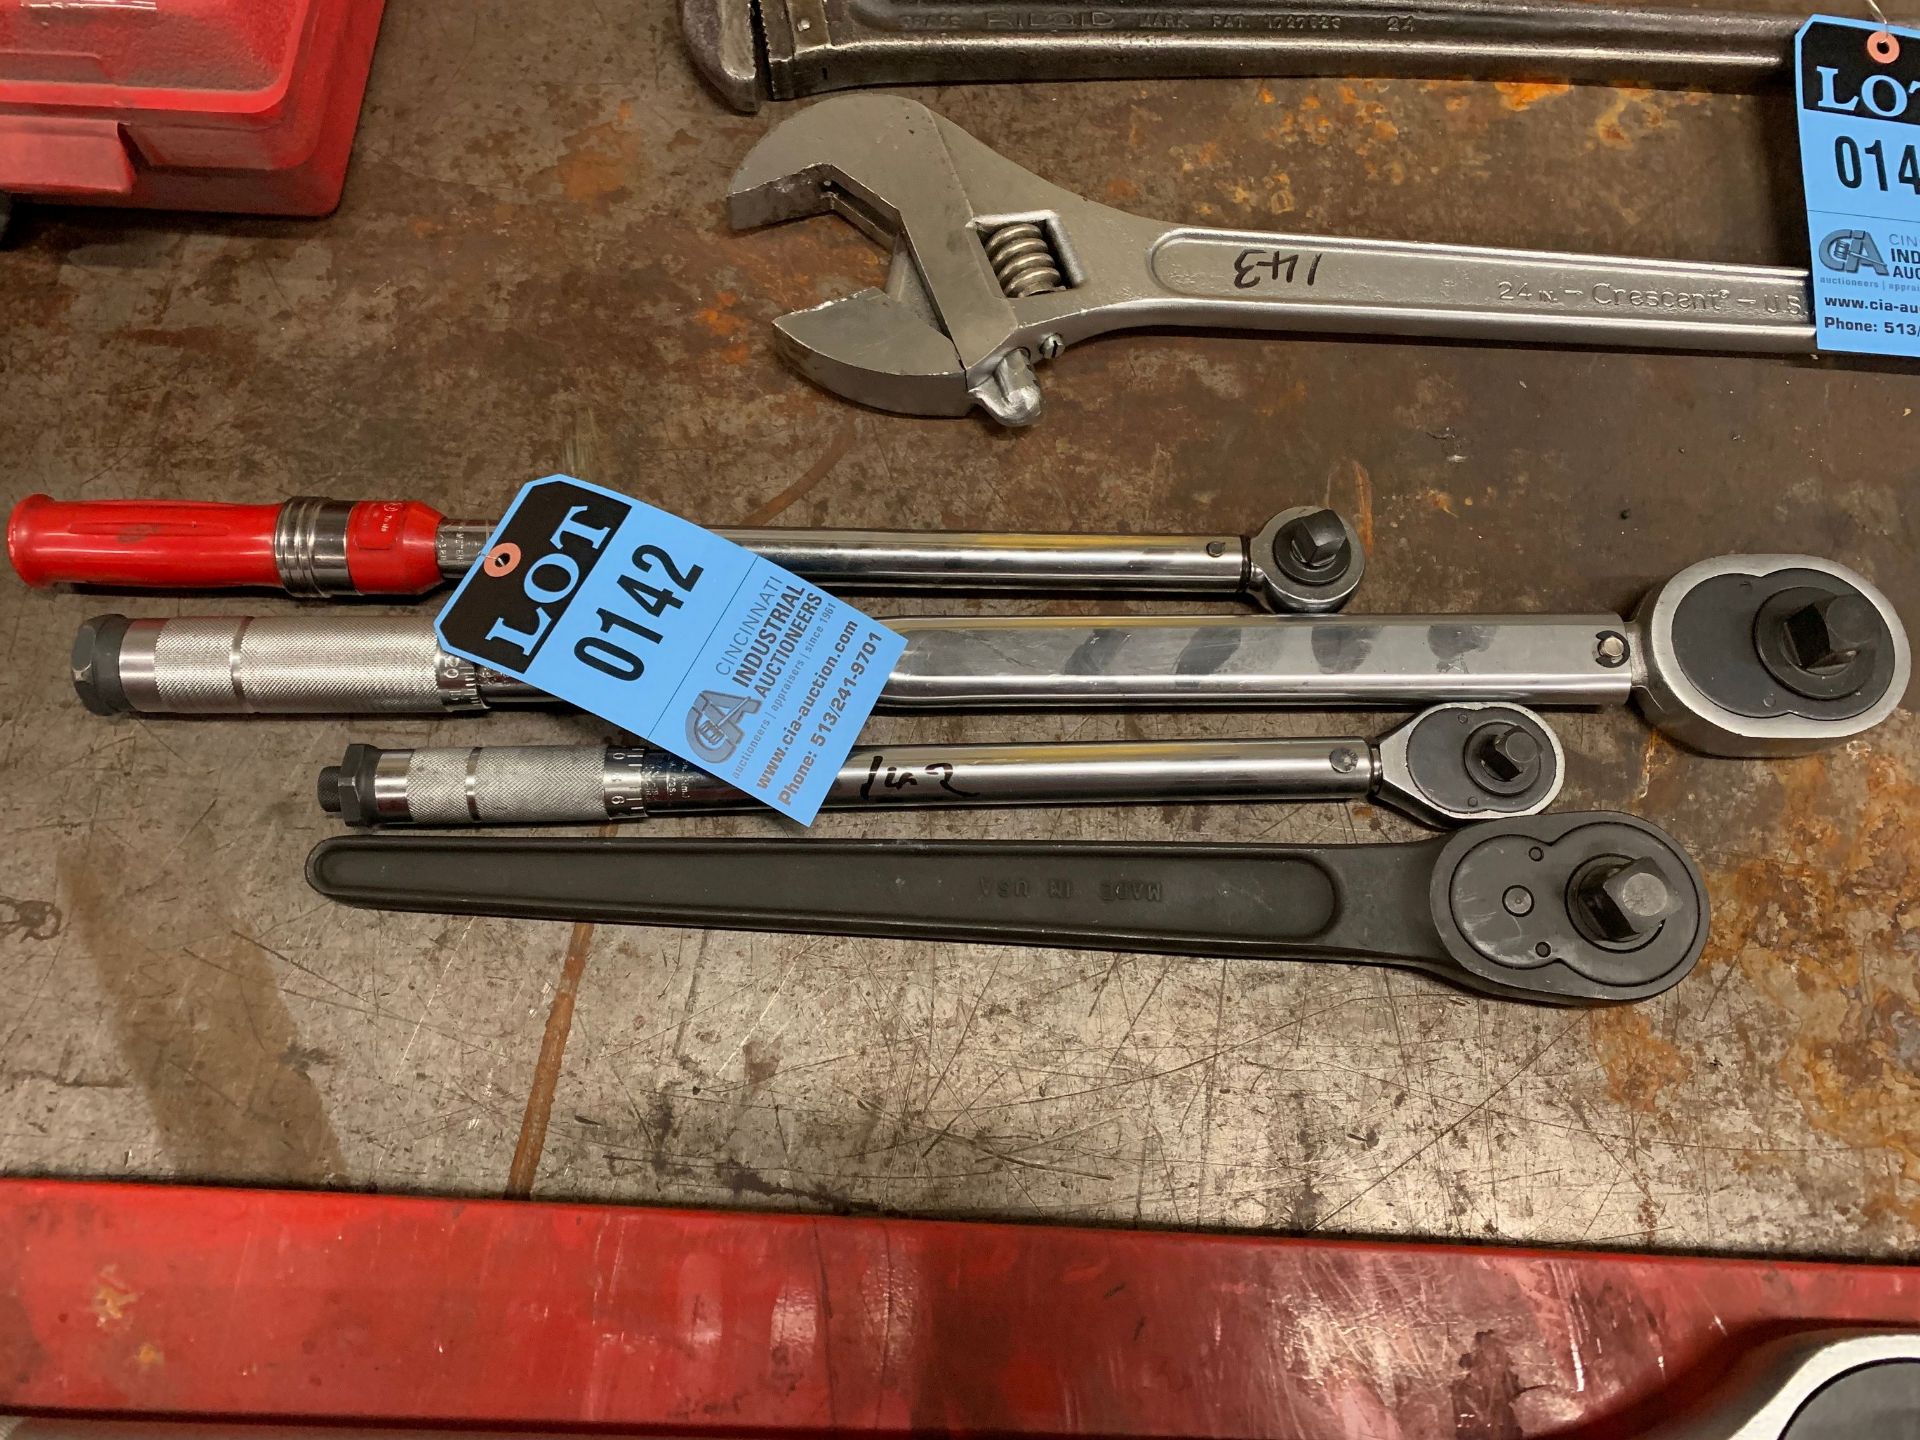 (LOT) (3) ADJUSTABLE TORQUE WRENCHES